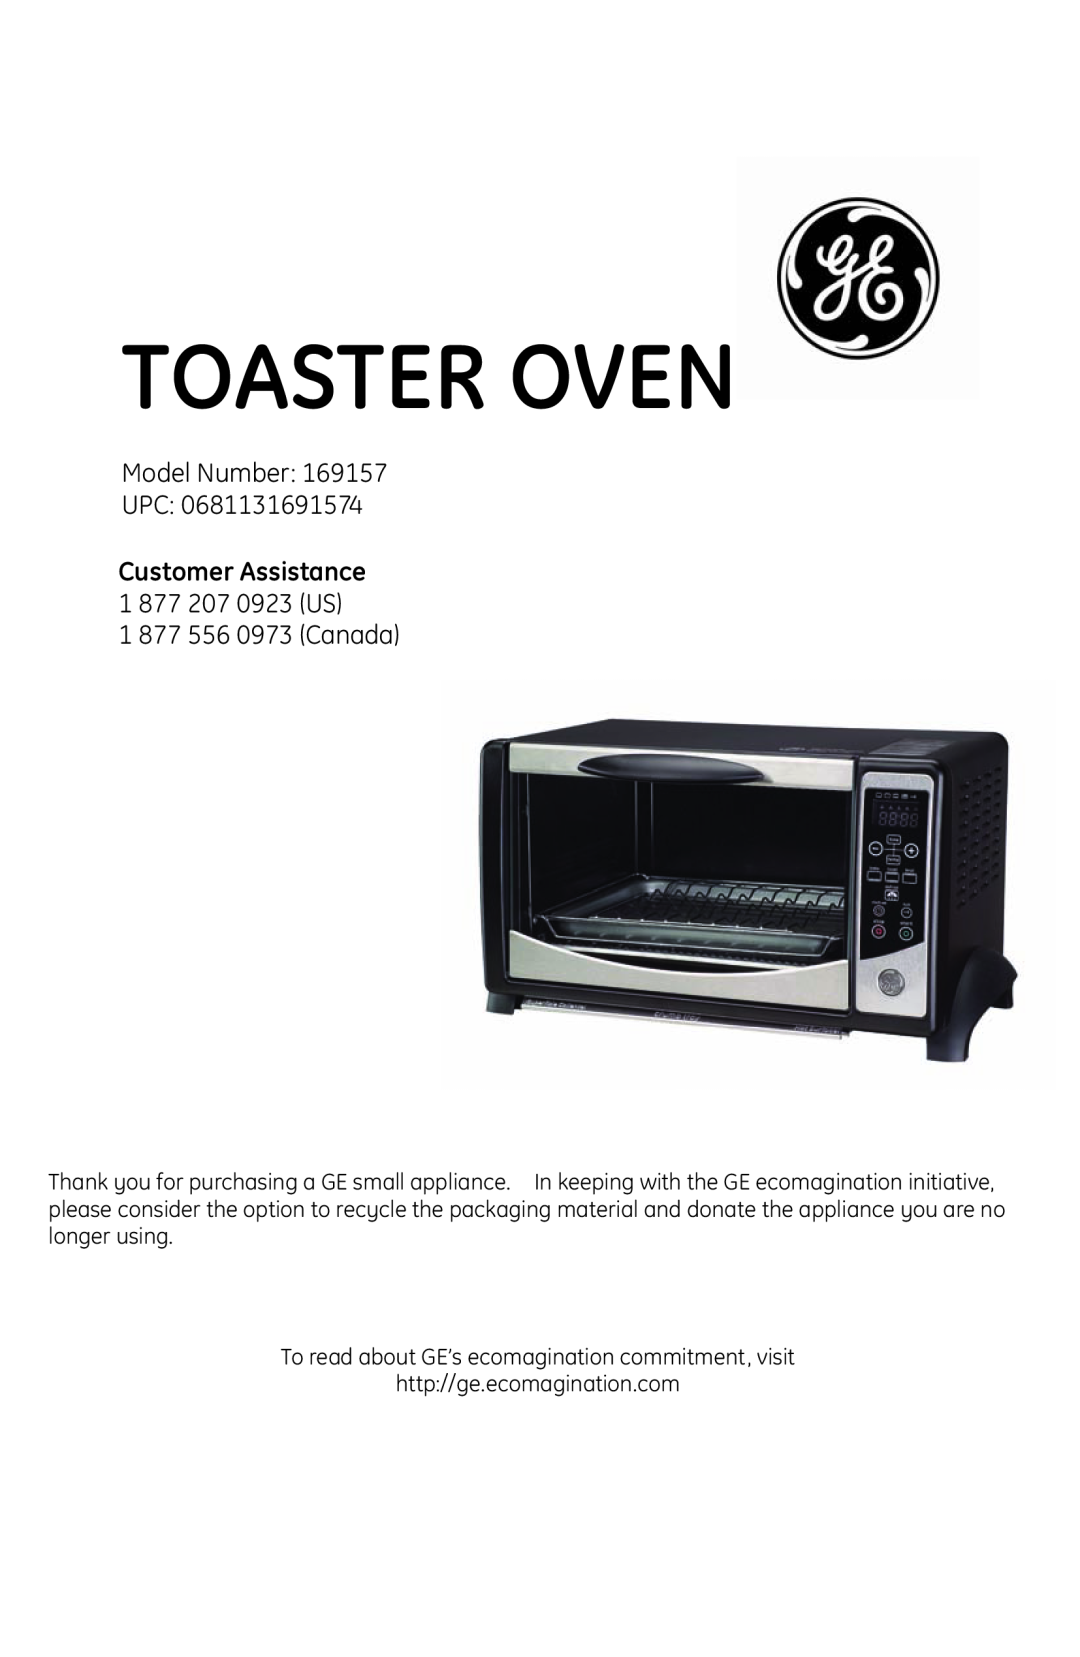 GE 0681131691574 manual Model Number UPC, 1 877 556 0973 Canada, Toaster Oven, Customer Assistance 1 877 207 0923 US 